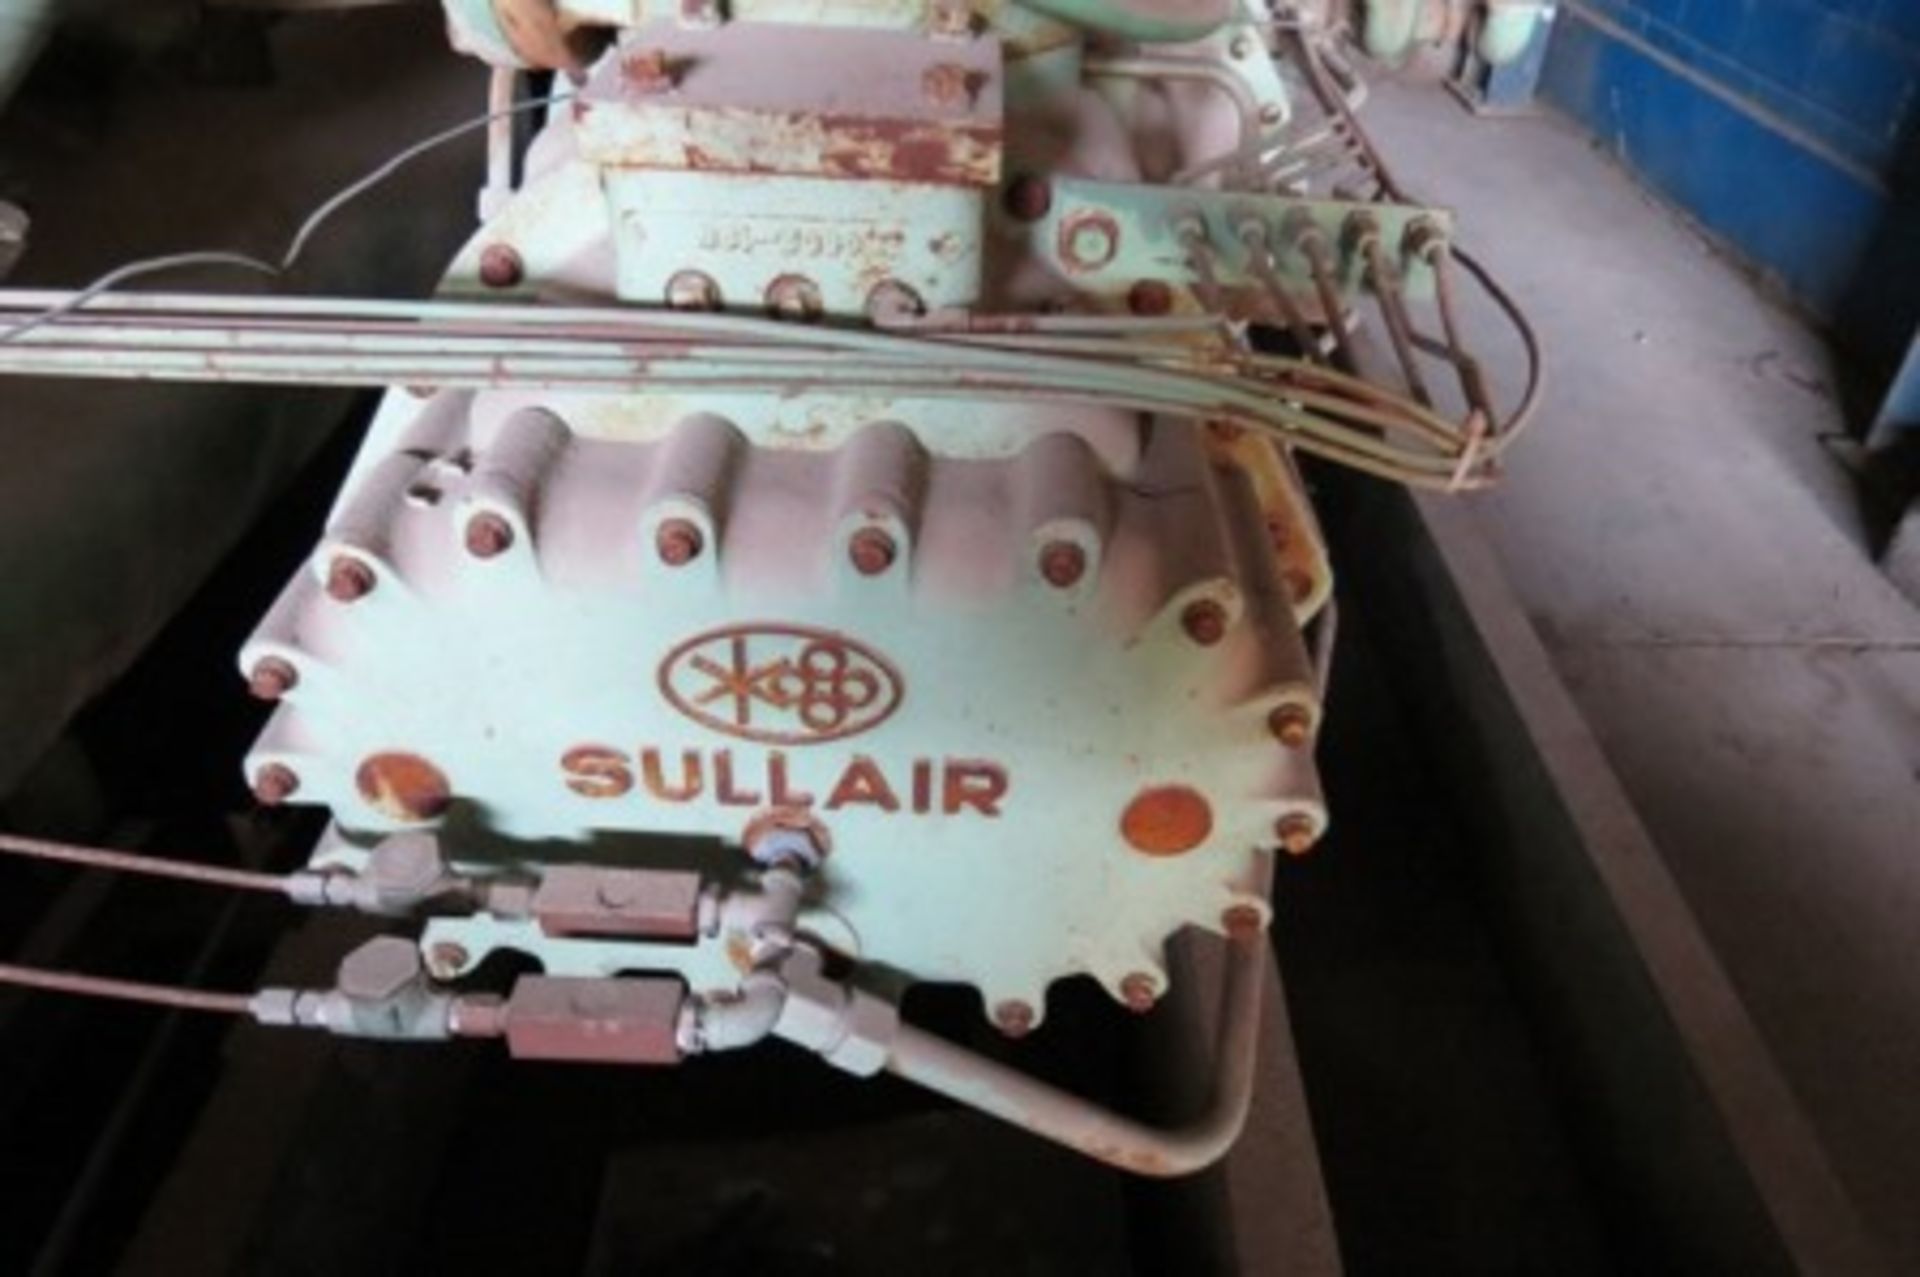 Air compressor Sullair 32 / 25-400L AC s/n 003-9159018/04/201, 1989, rotary screw, 450 hp - Image 5 of 19